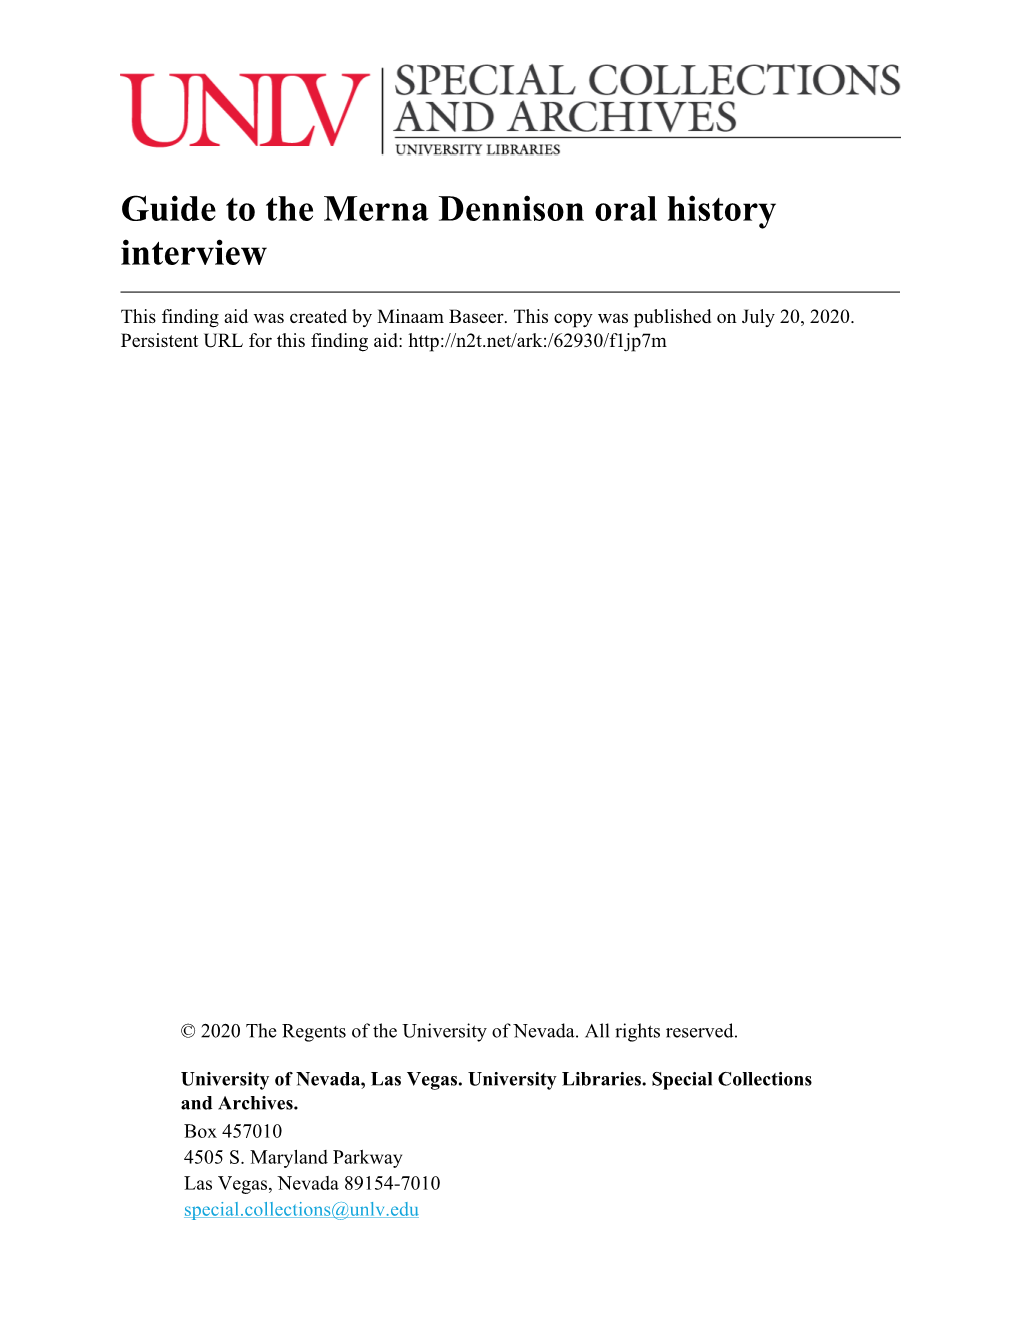 Guide to the Merna Dennison Oral History Interview